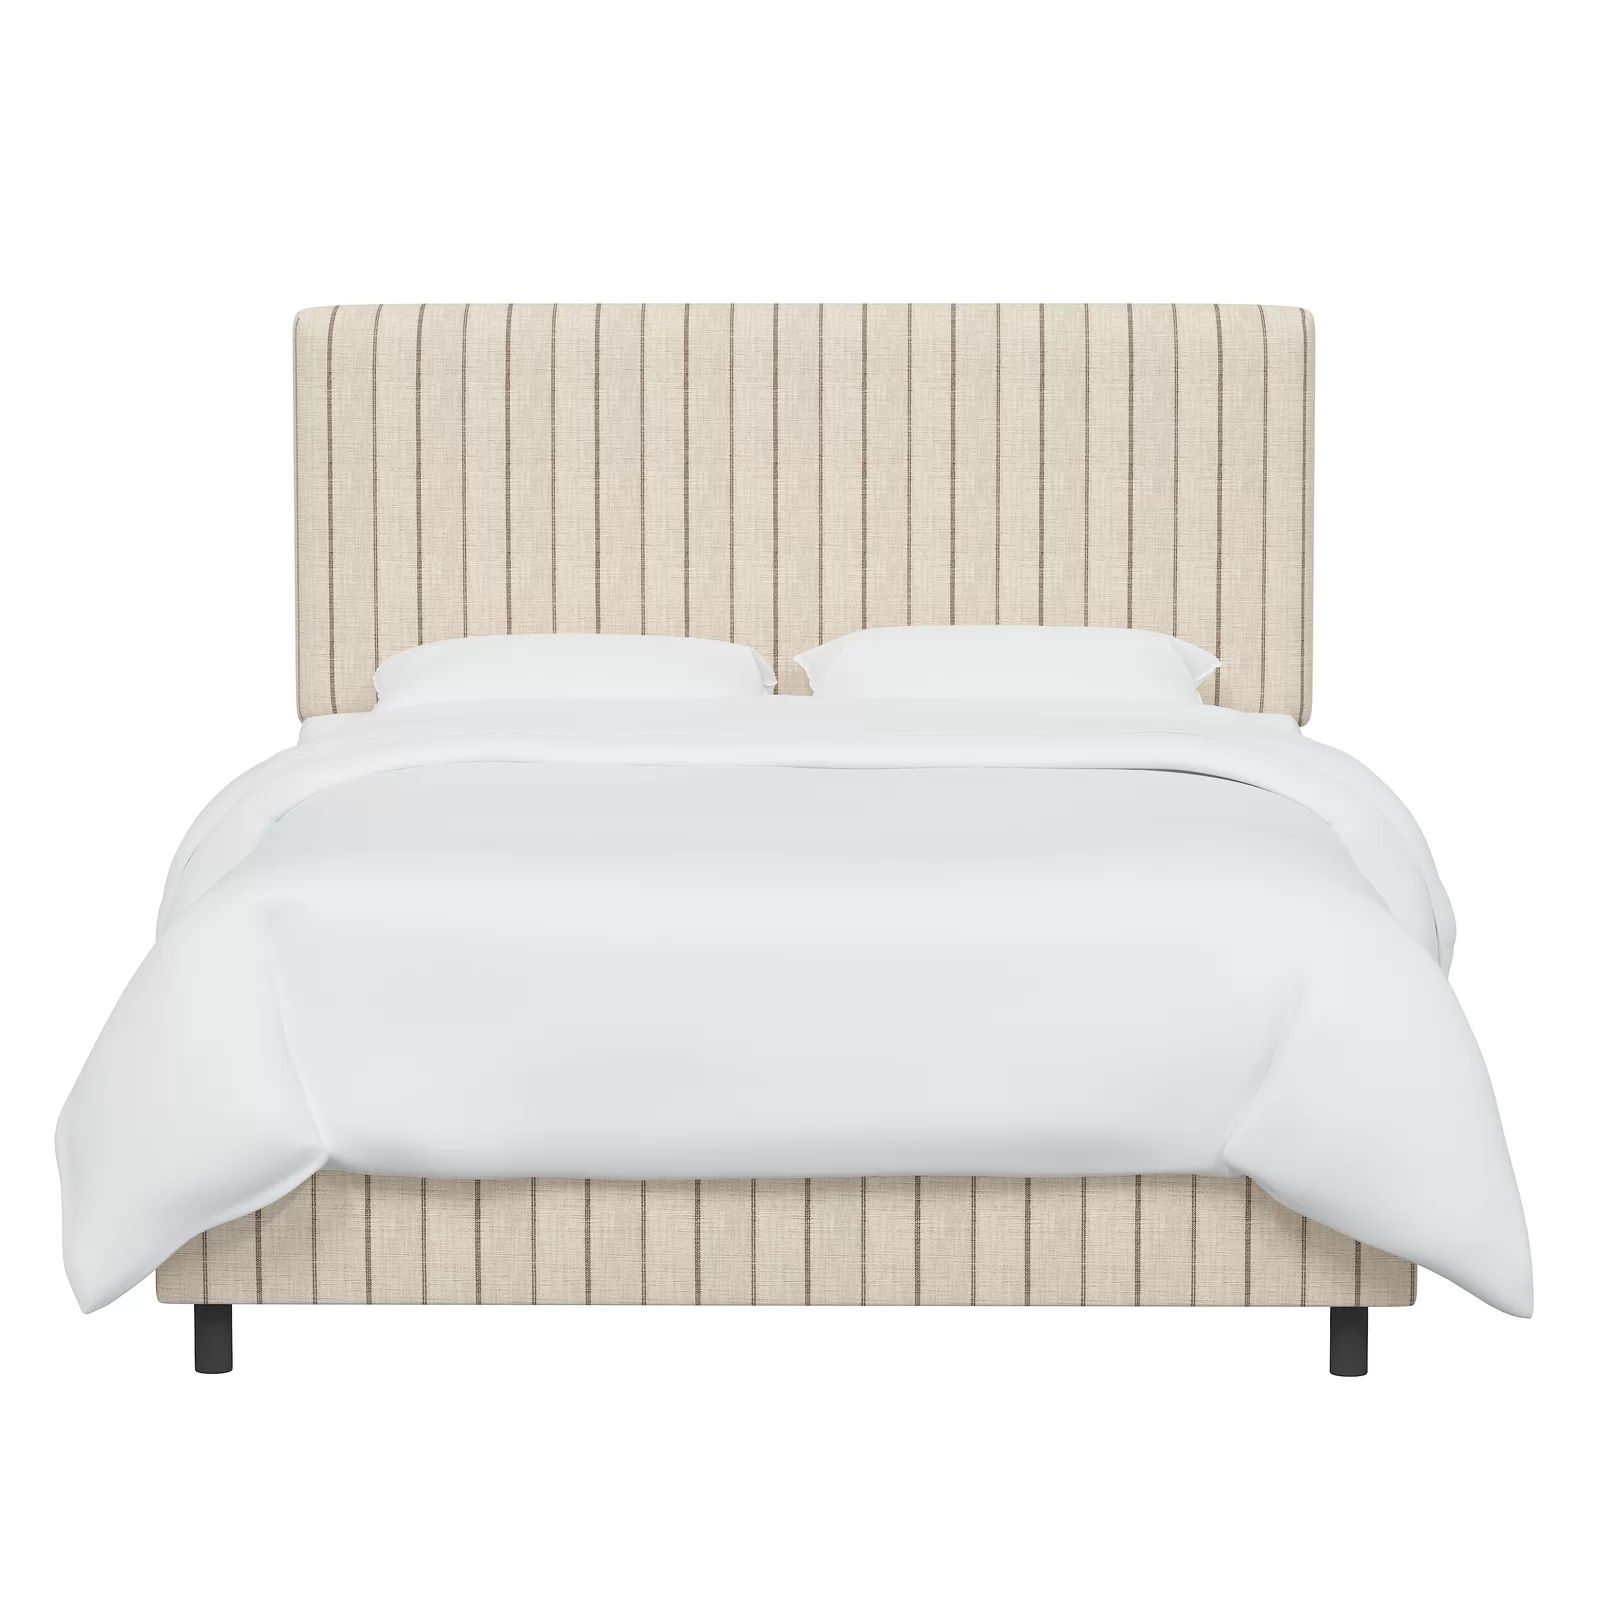 Annabella Upholstered Low Profile Standard Bed | Wayfair Professional